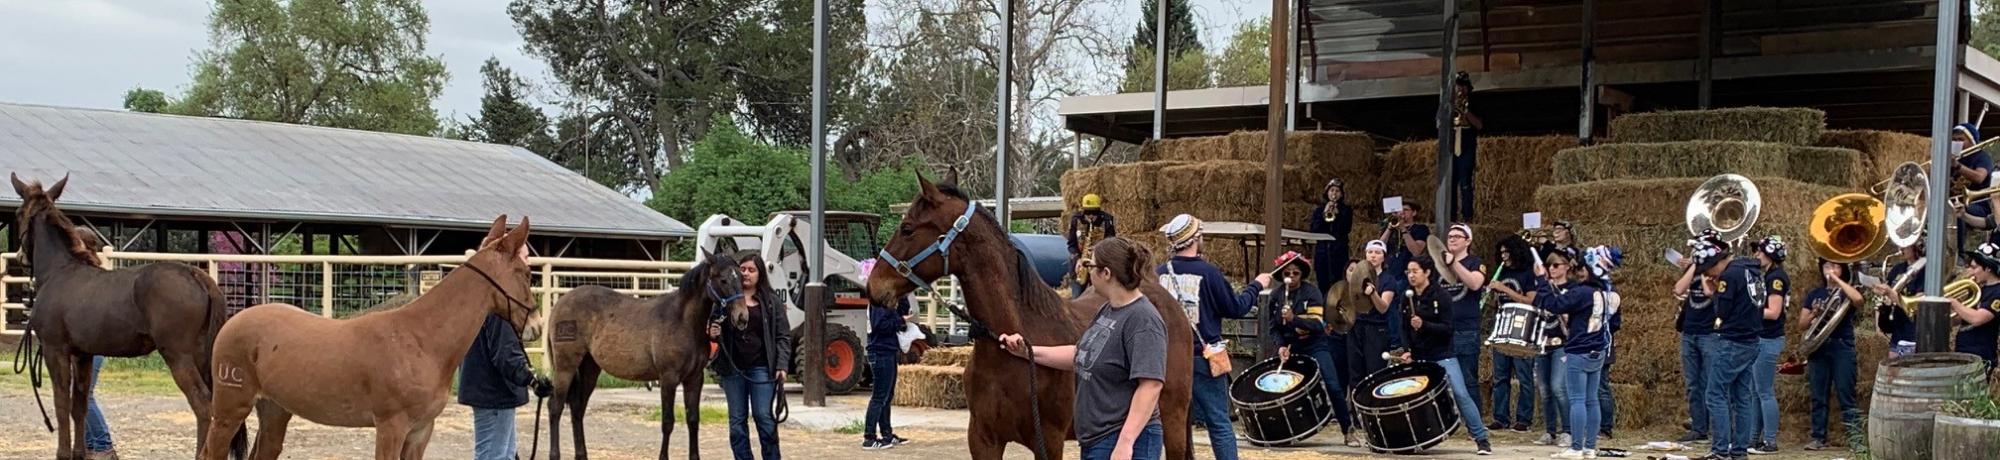 The Cal Aggie Marching Band-uh! visited the Horse Barn to help get the yearlings ready for the sights and sounds of the 2019 Picnic Day Parade -